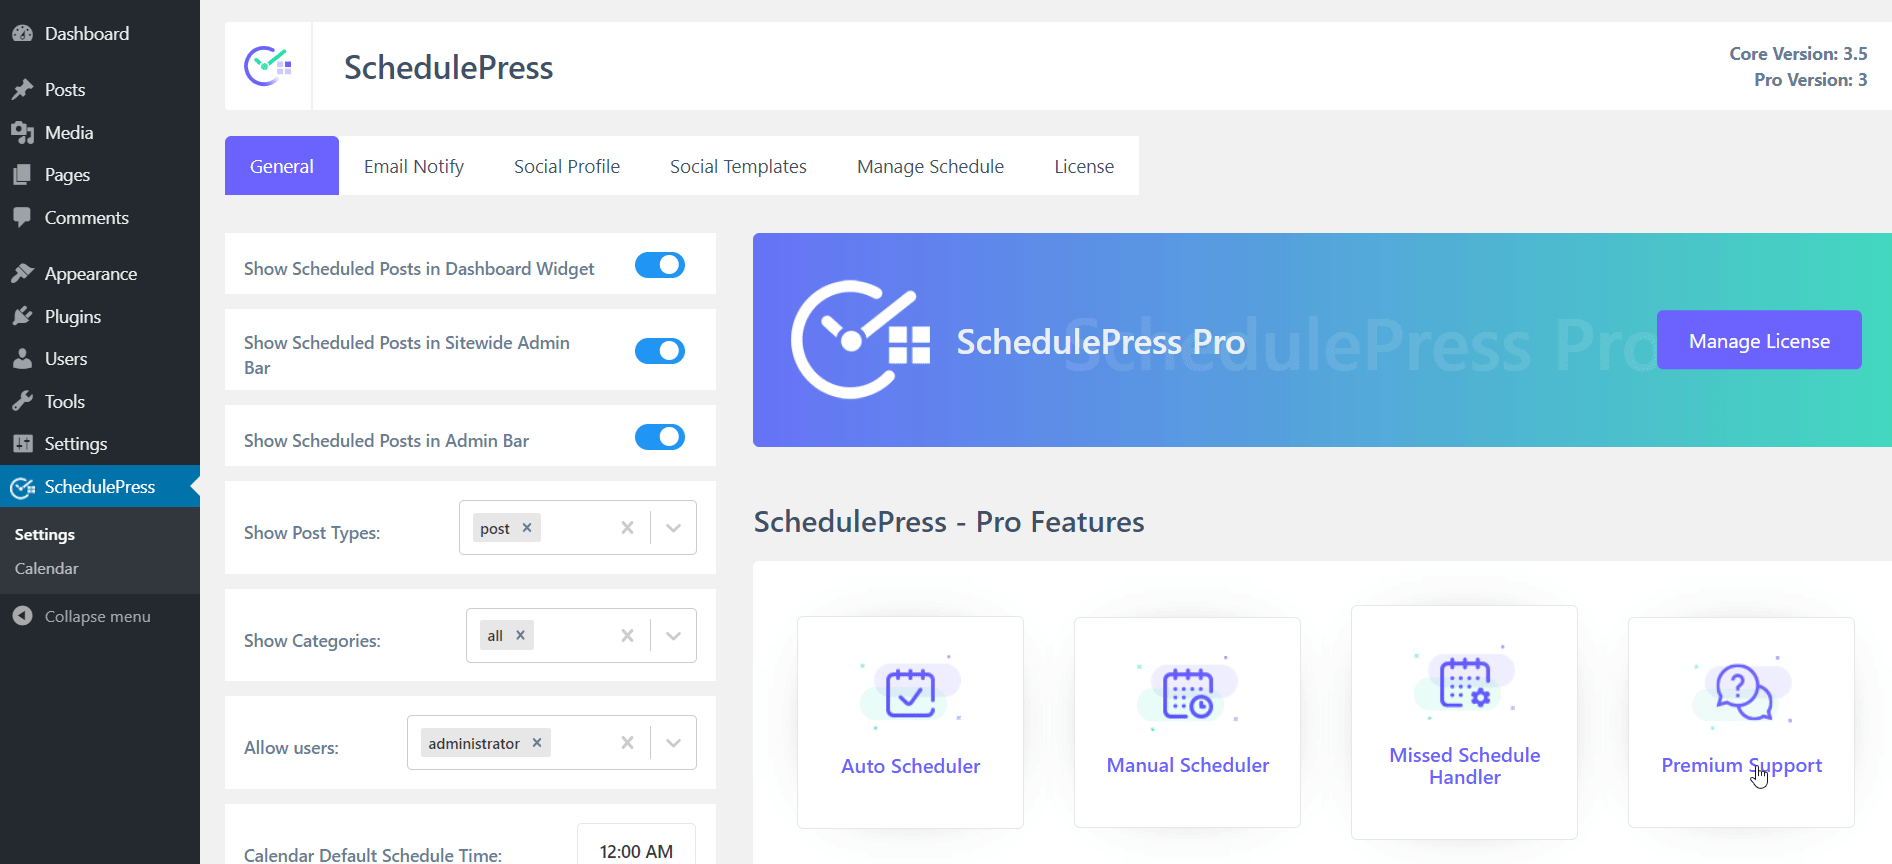 How To Auto Schedule Your Blog Posts In WordPress To Be More Productive In 2022 2